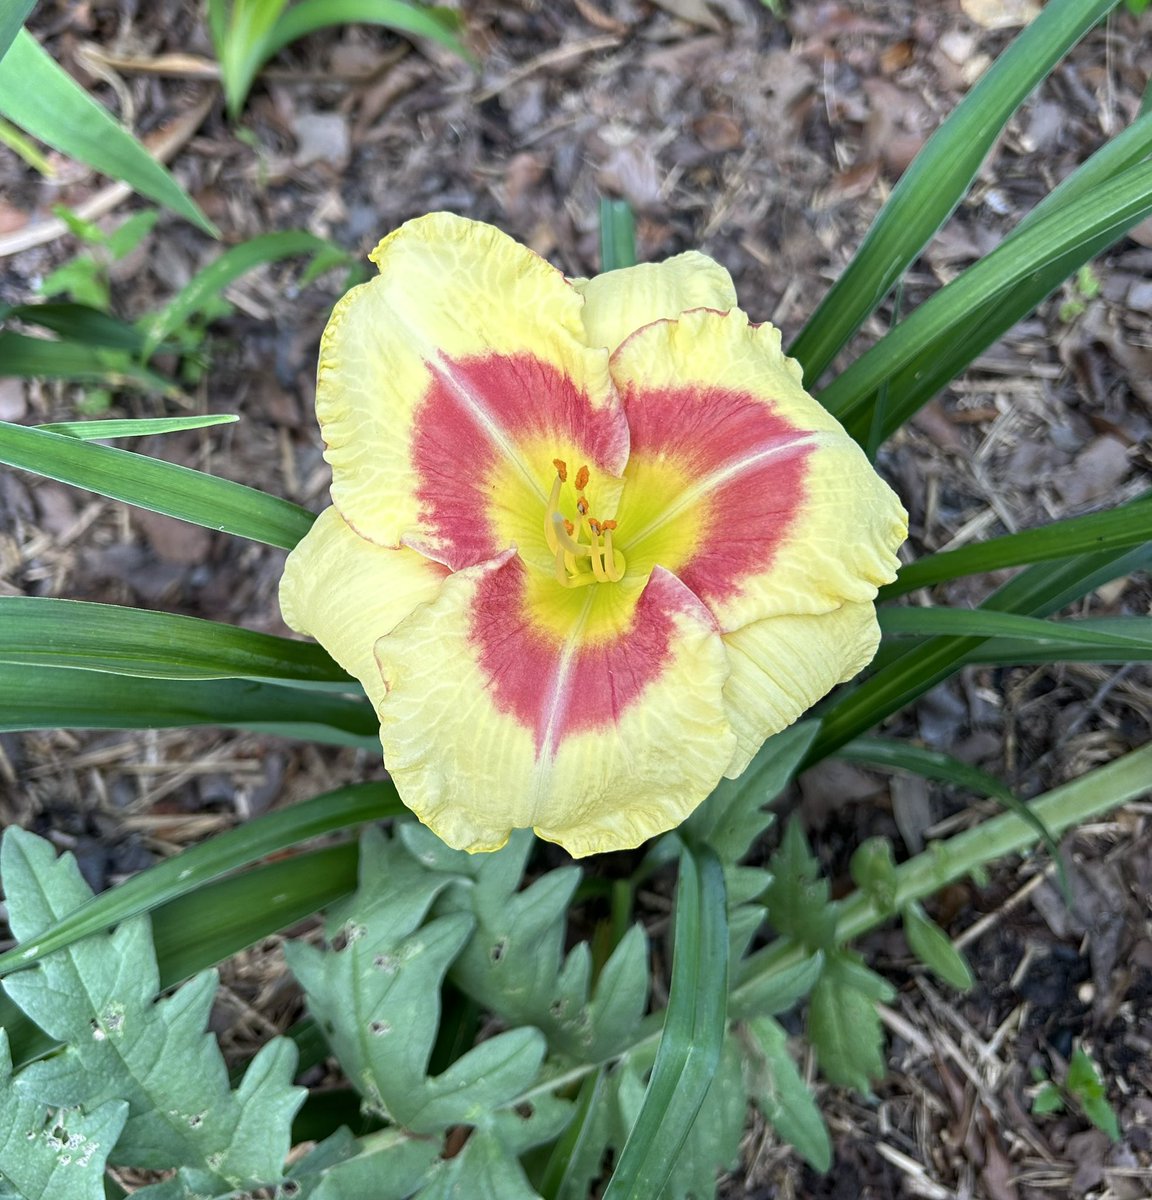 #SundayYellow is the first #Hemerocallis or Daylily in my collection to bloom. This one is definitely eye catching👀💛

#Daylily #Flowers #Gardening #FlowerPhotography #Plants #FlowerReport #FlowerGardening #SundayFunday